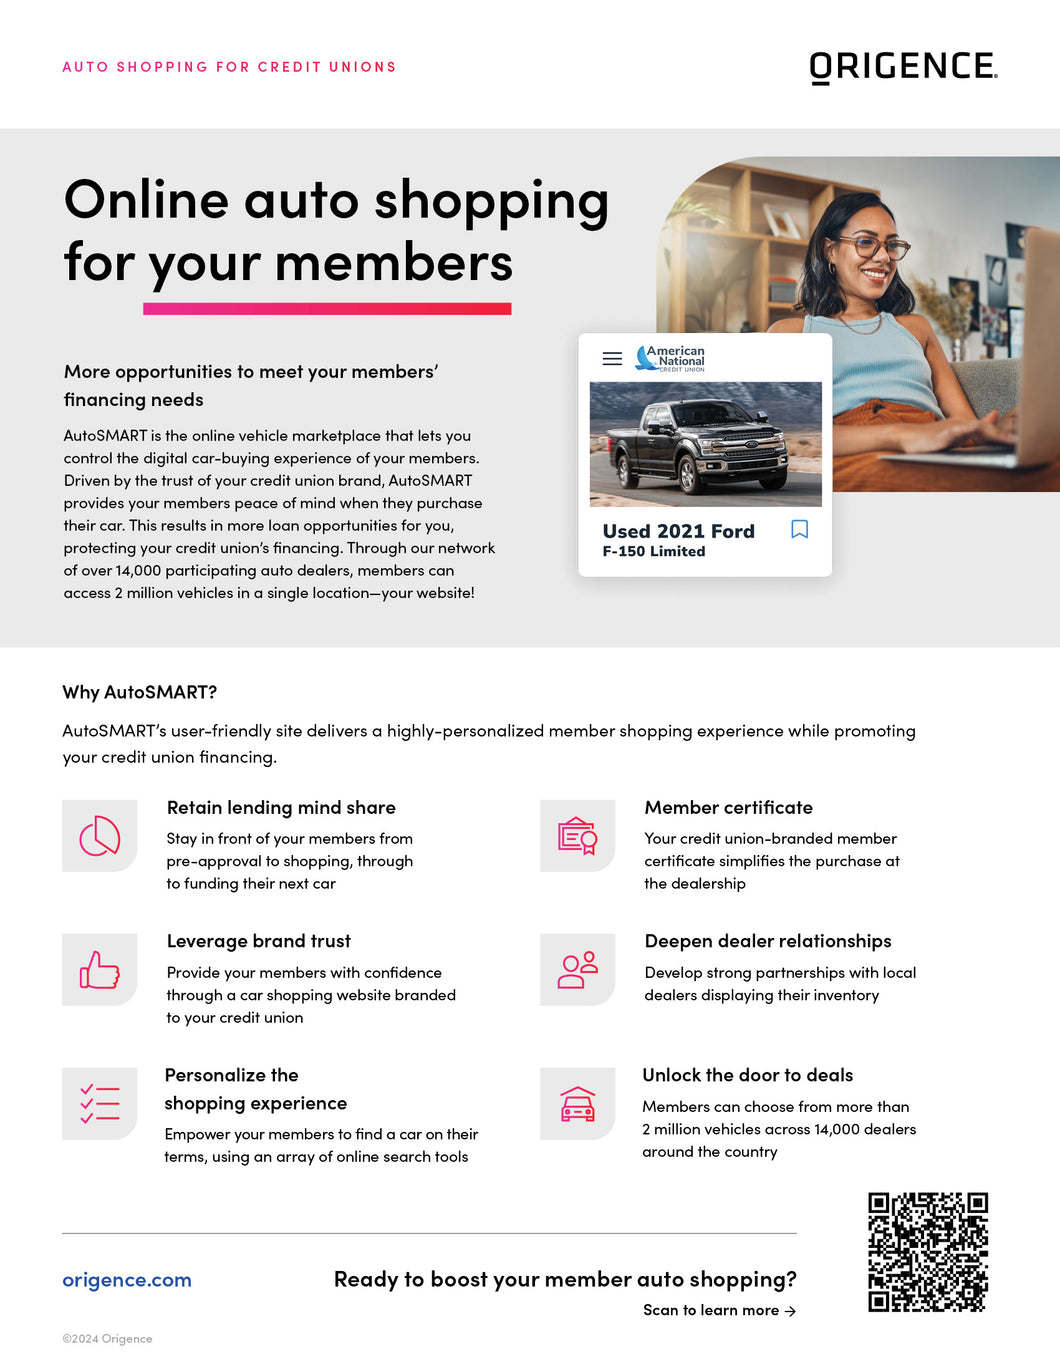 Auto Shopping Overview Sales Sheet (Credit Unions)